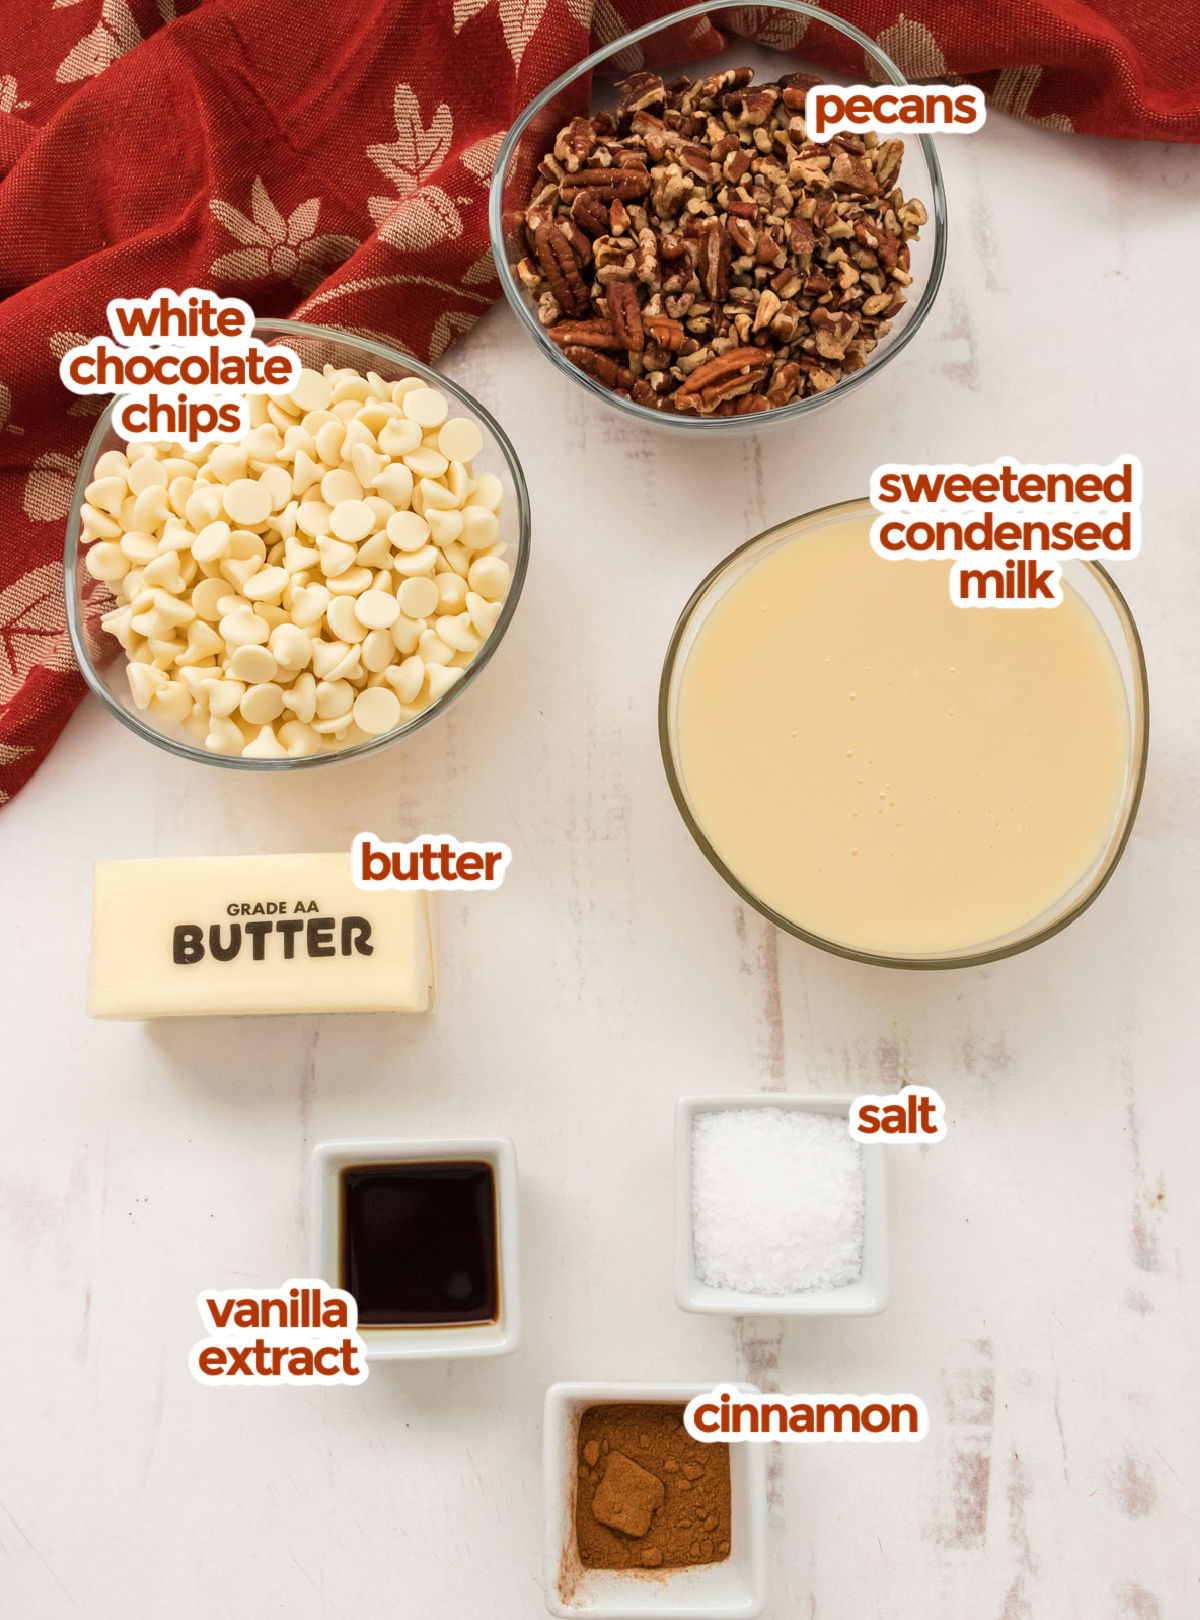 All the ingredients you will need to make Butter Pecan Fudge including pecans, Sweetened Condensed Milk, White Chocolate Chips, Butter, Vanilla, Cinnamon and Salt.